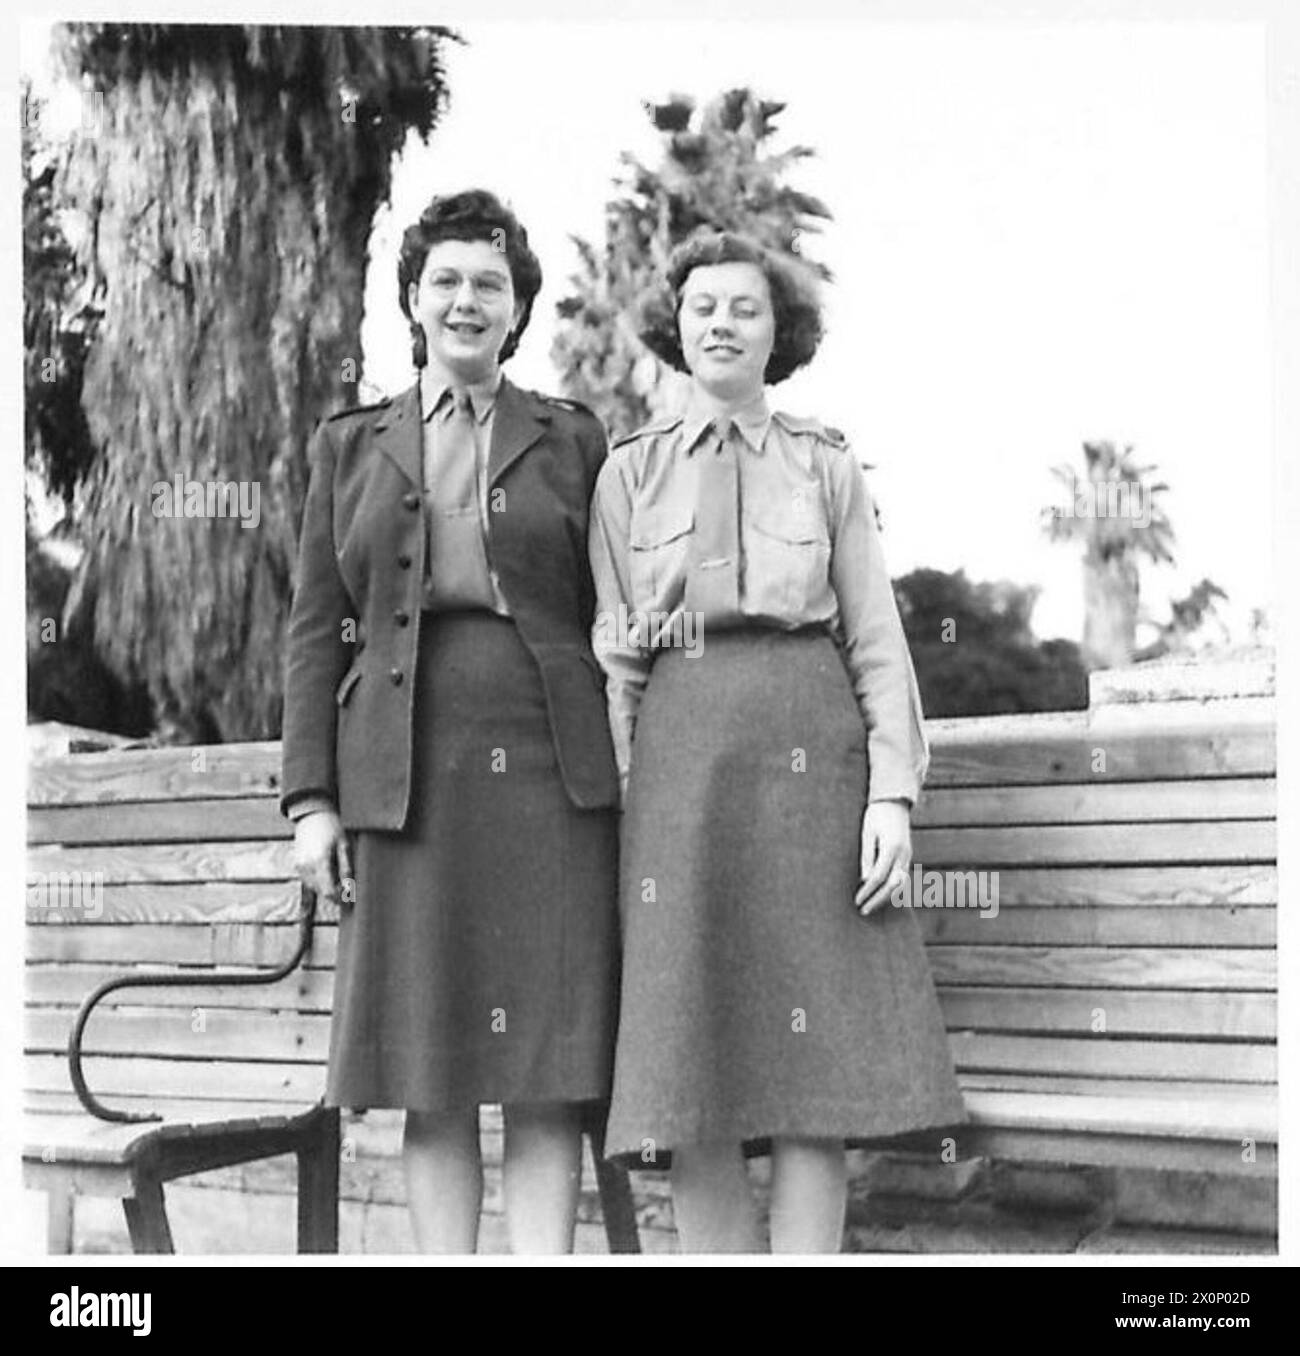 NORTH AFRICA : E.F.I. (NAAFI) SERVICES IN ALGIERS - Miss C. Cook of Tillicoyltry and Miss E.J. Fessee of Killin, Perthshire. Photographic negative , British Army Stock Photo